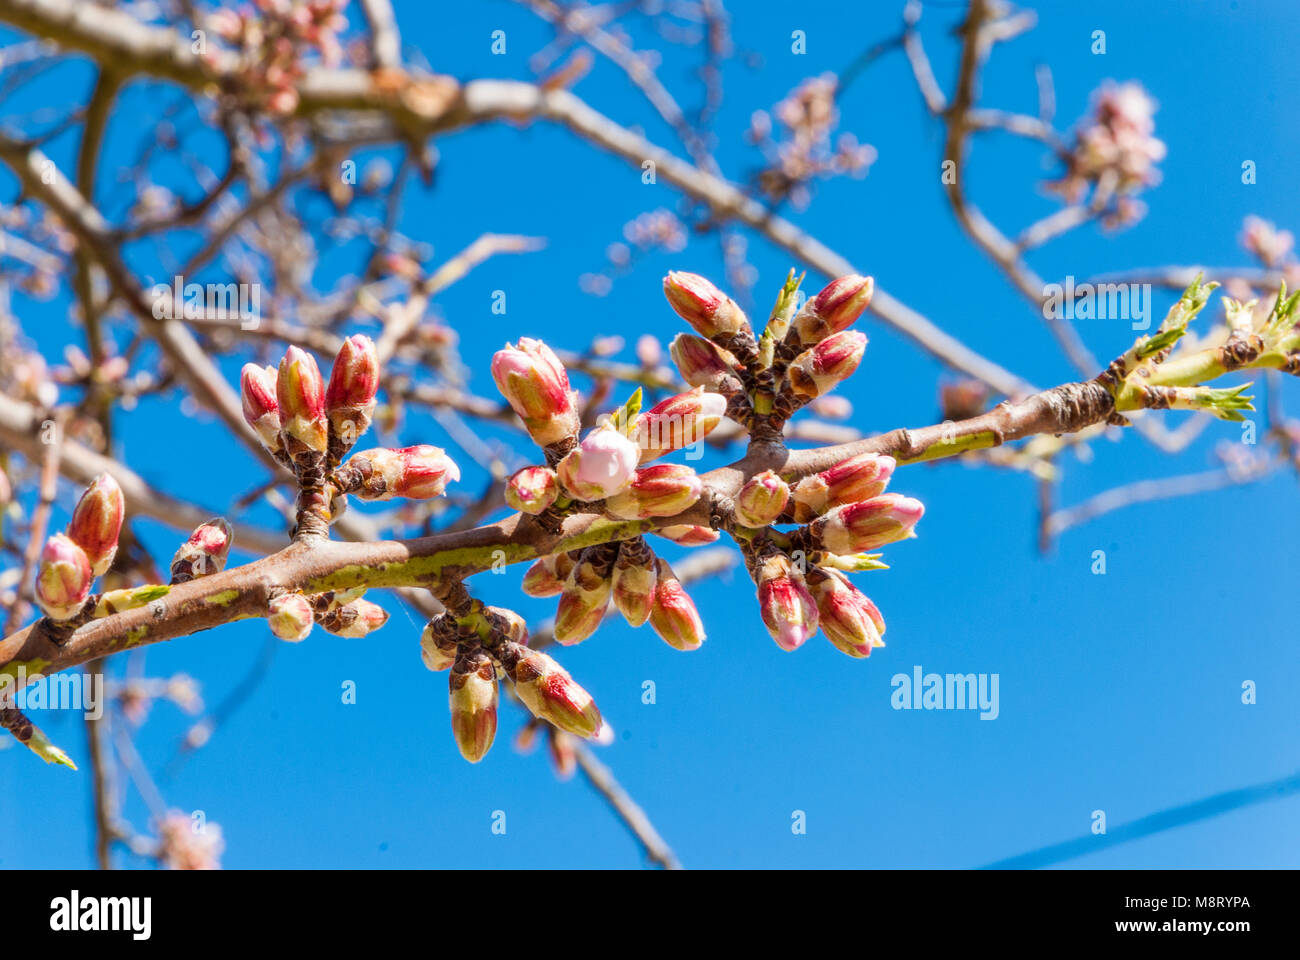 Almond tree with blossom Stock Photo